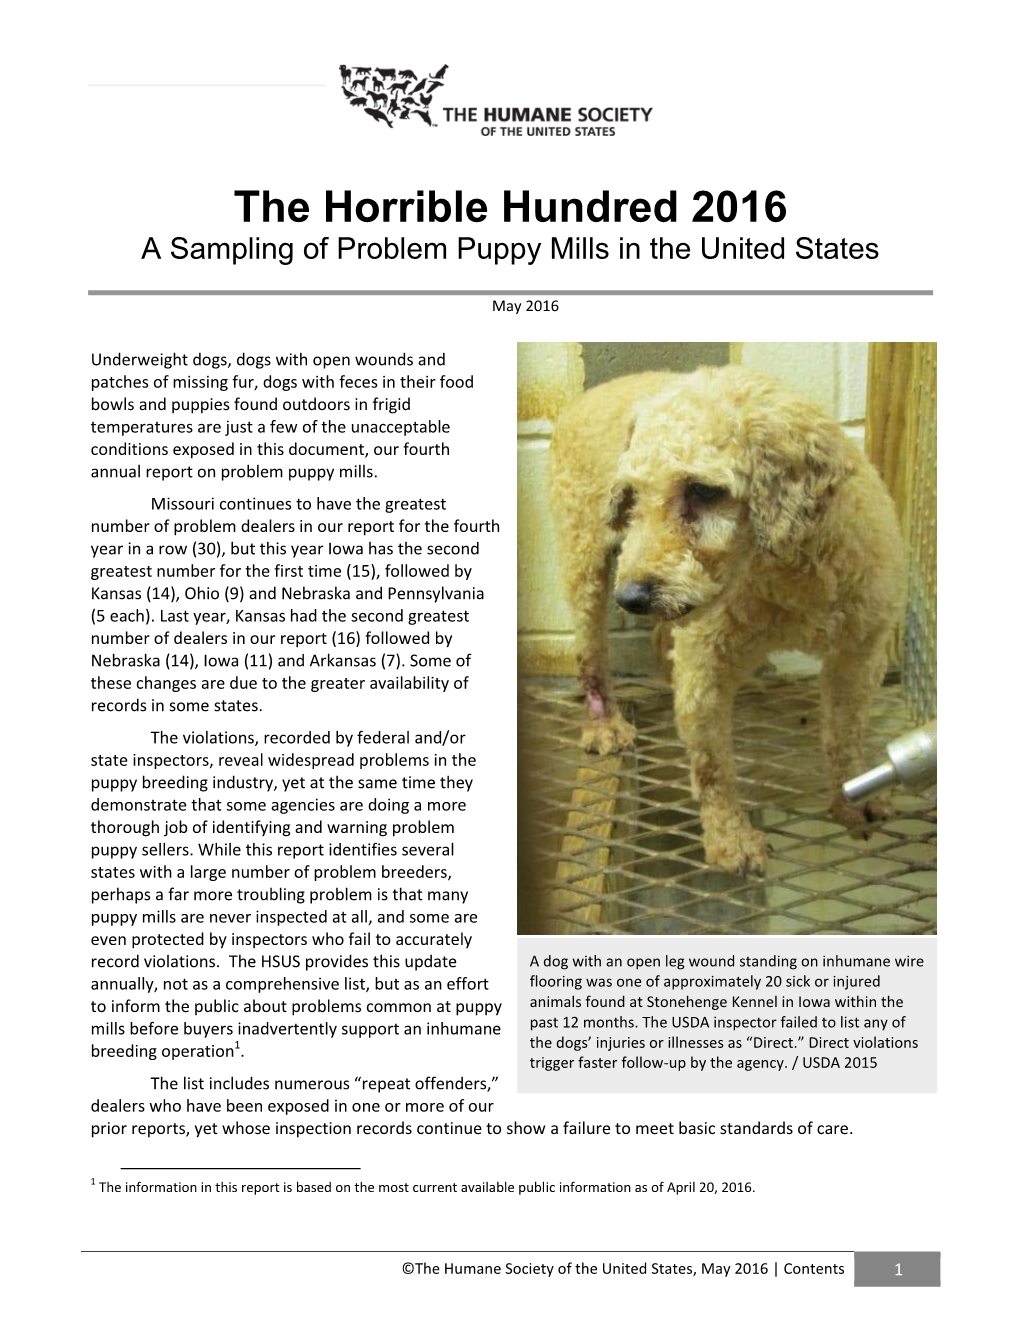 The Horrible Hundred 2016 a Sampling of Problem Puppy Mills in the United States